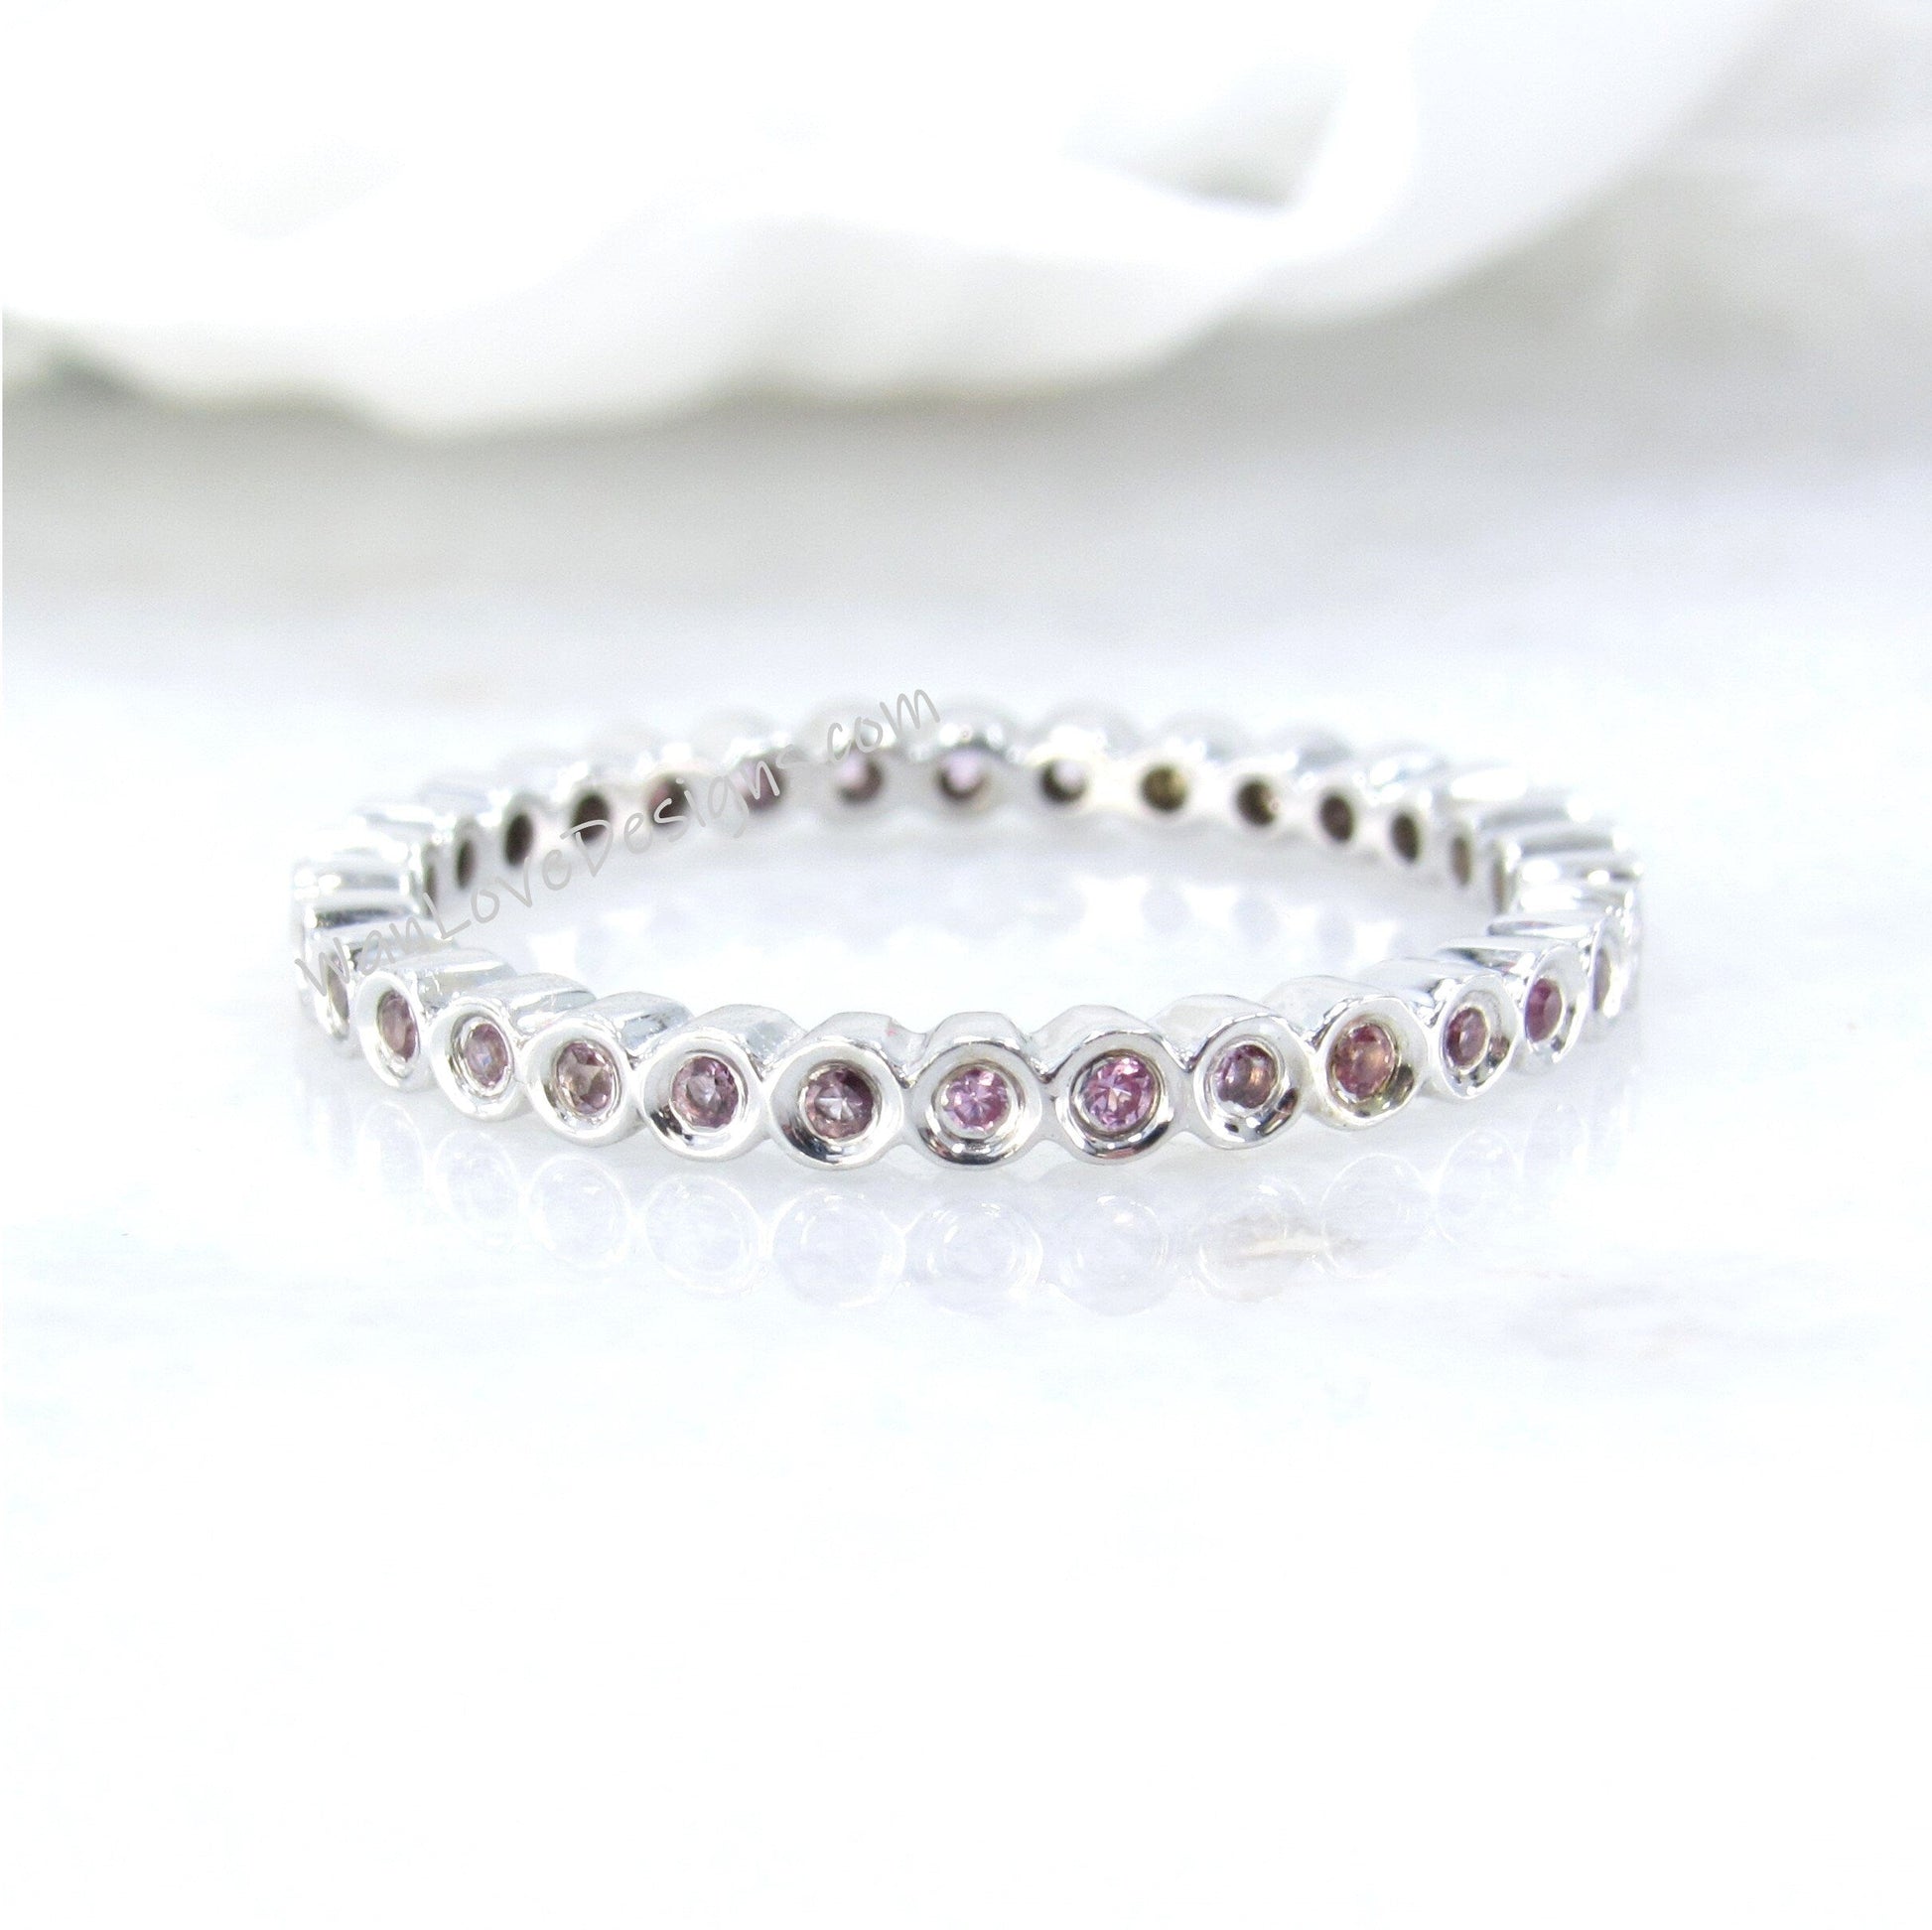 Pink Sapphire Bezel Band, Birthstone Ring, Rose Gold Pink Sapphire Ring, Birthstone Wedding Band, Dainty Bubble Bezel Ring, Stacking Ring Wan Love Designs